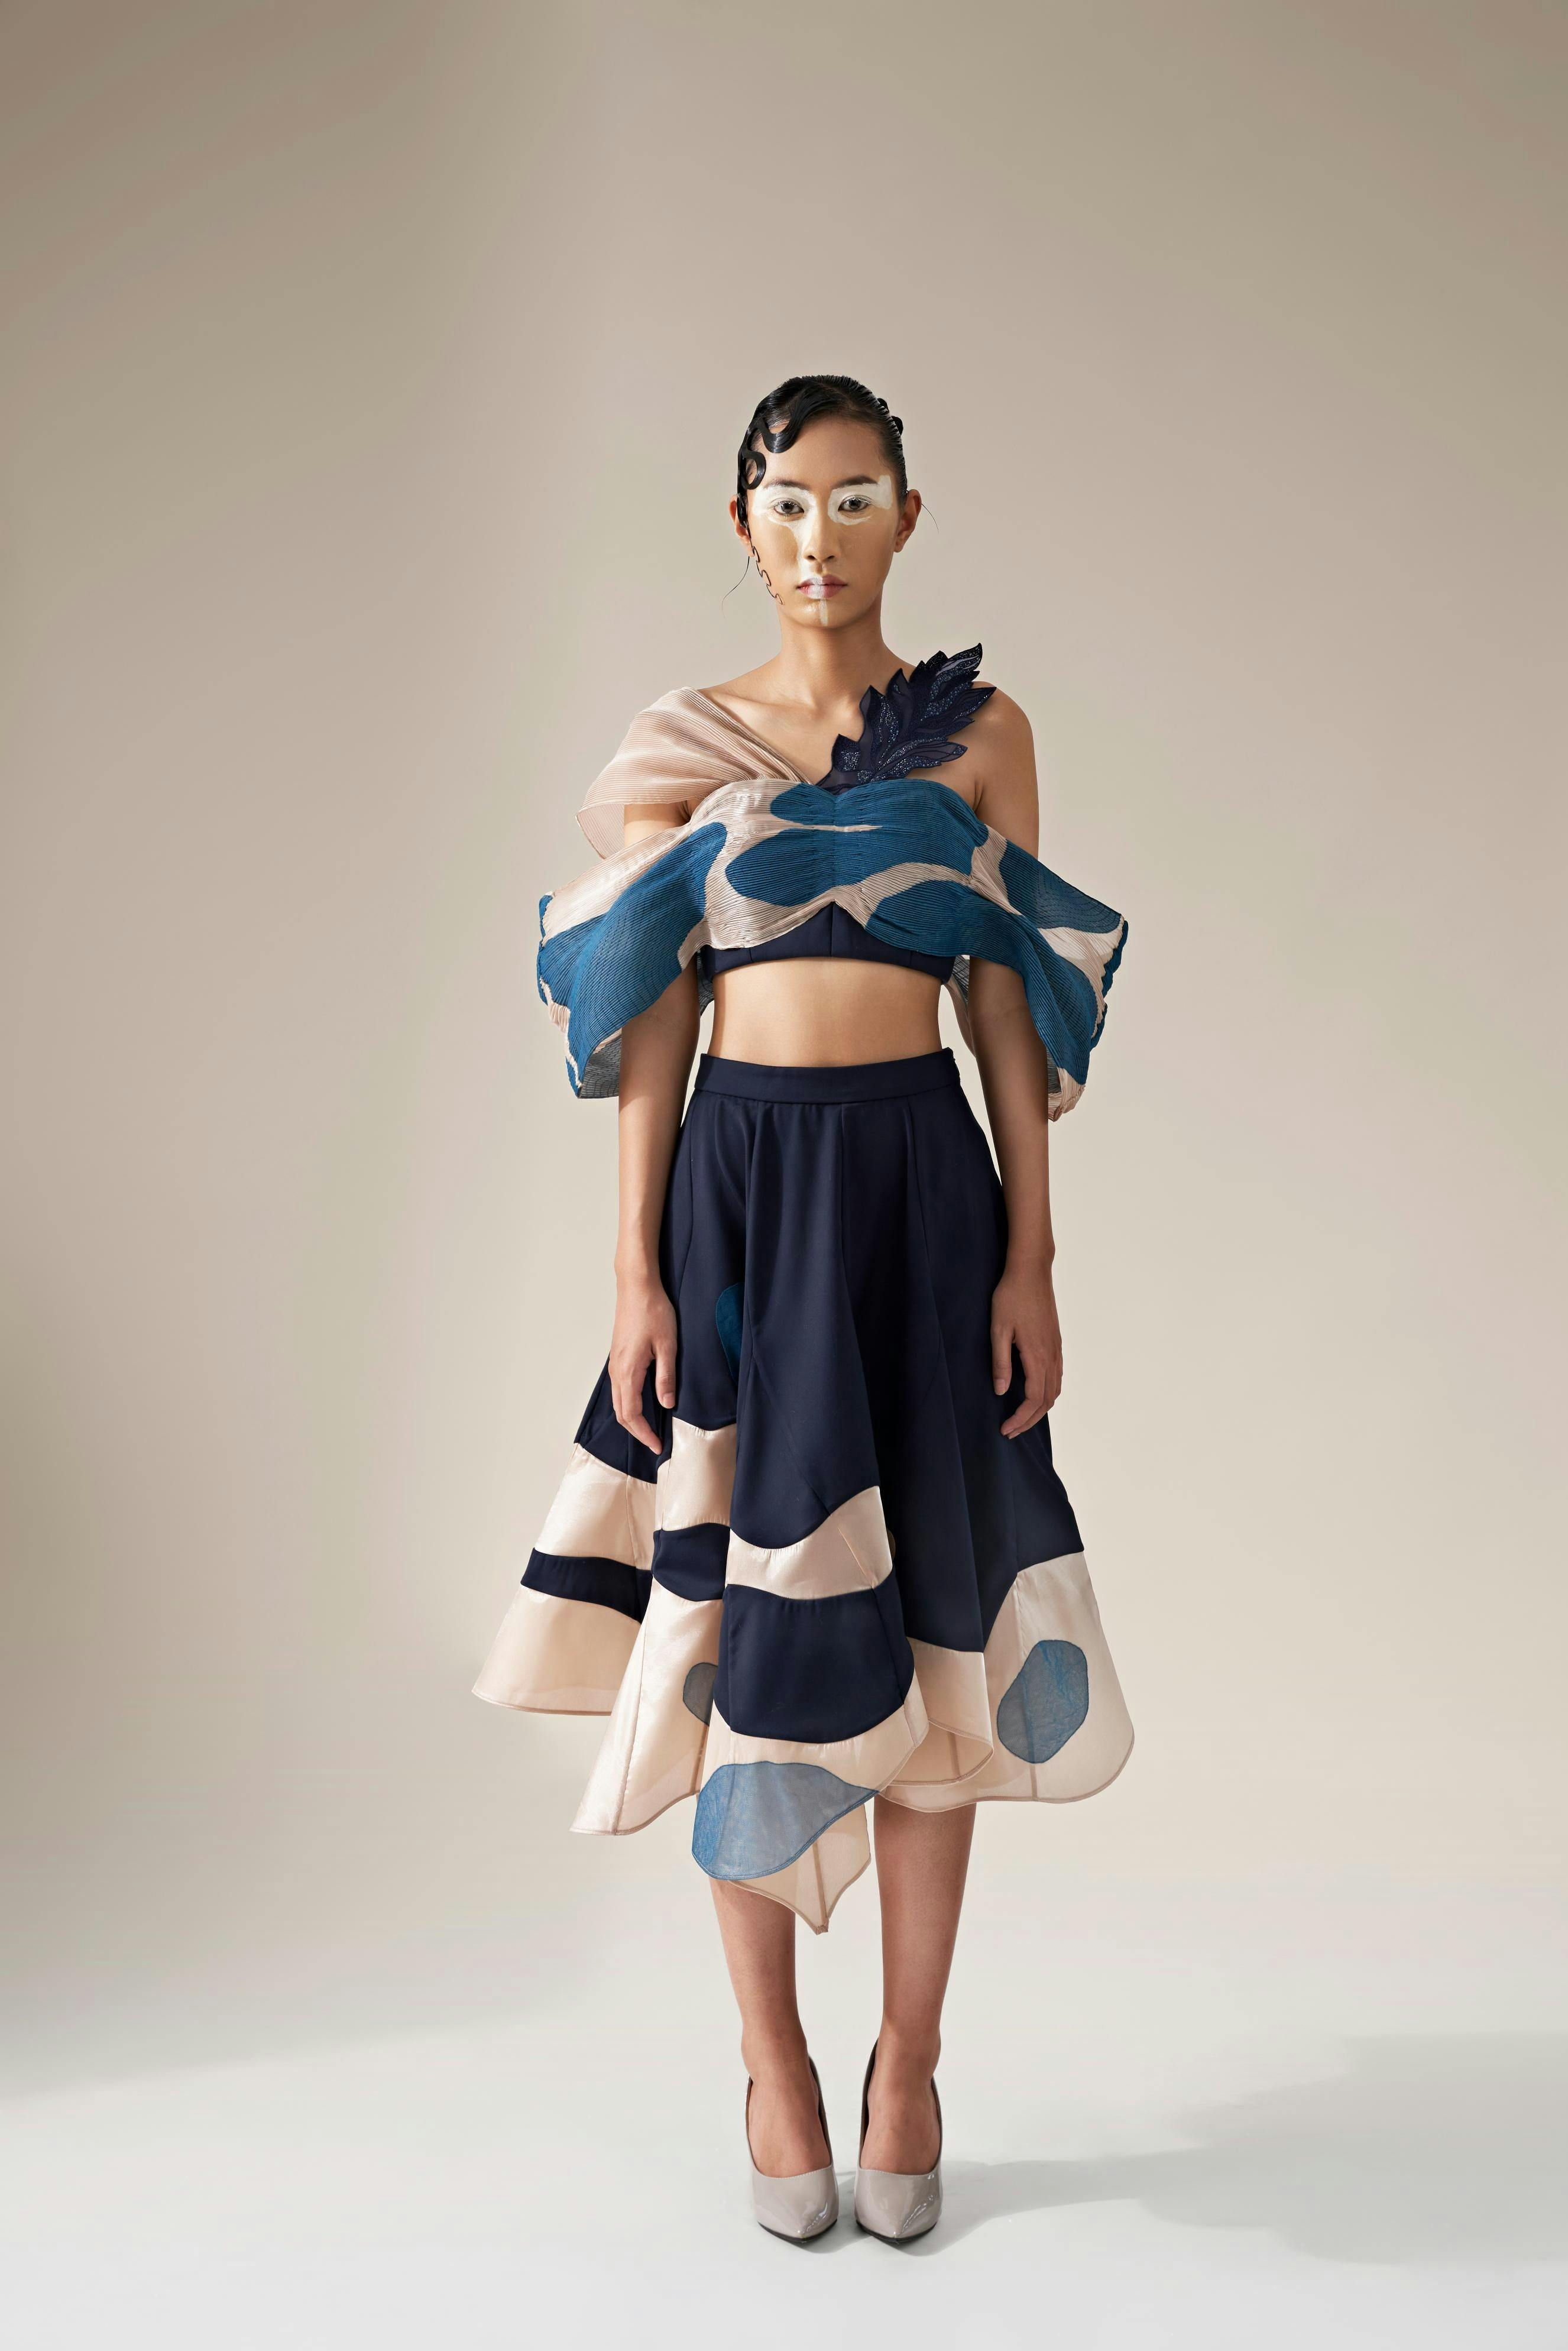 The Winged Symphony Skirt, a product by Siddhant Agrawal Label